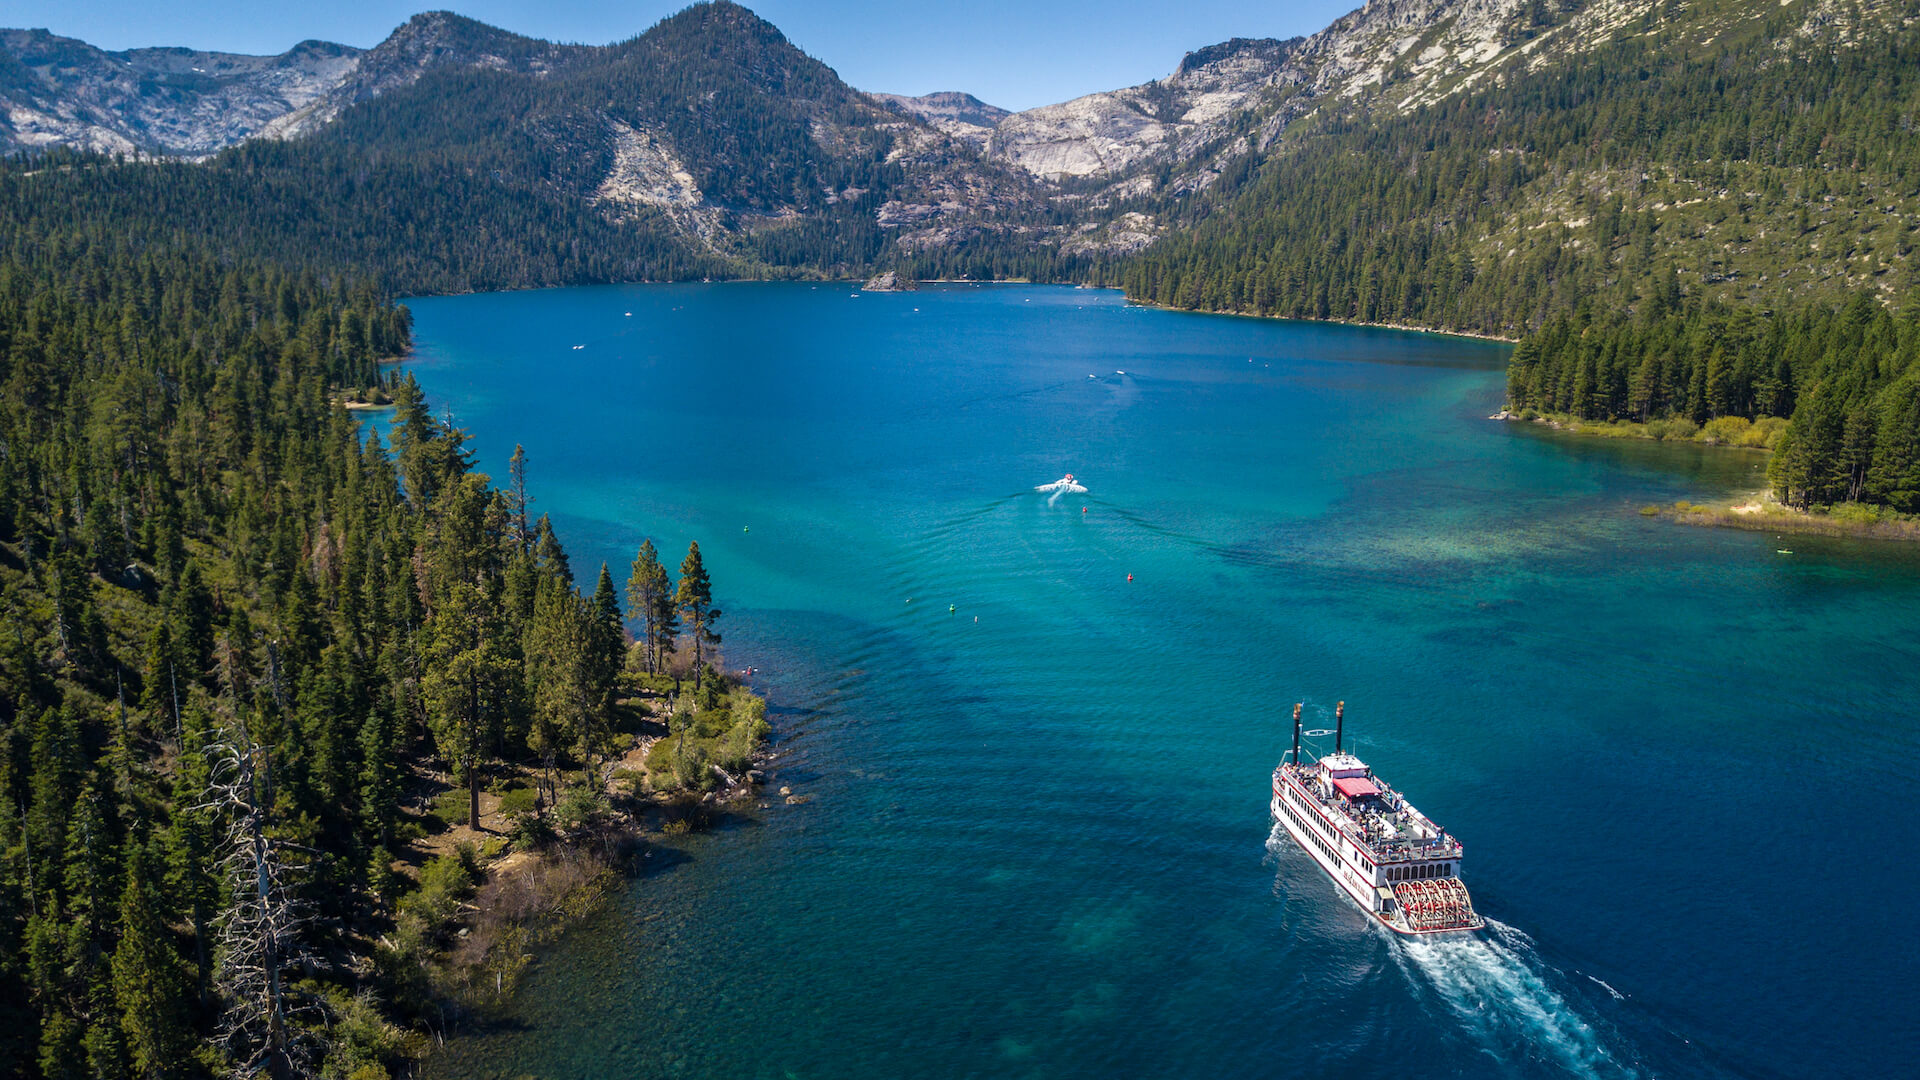 M.S. Dixie at Emerald Bay - Zephyr Cove Resort